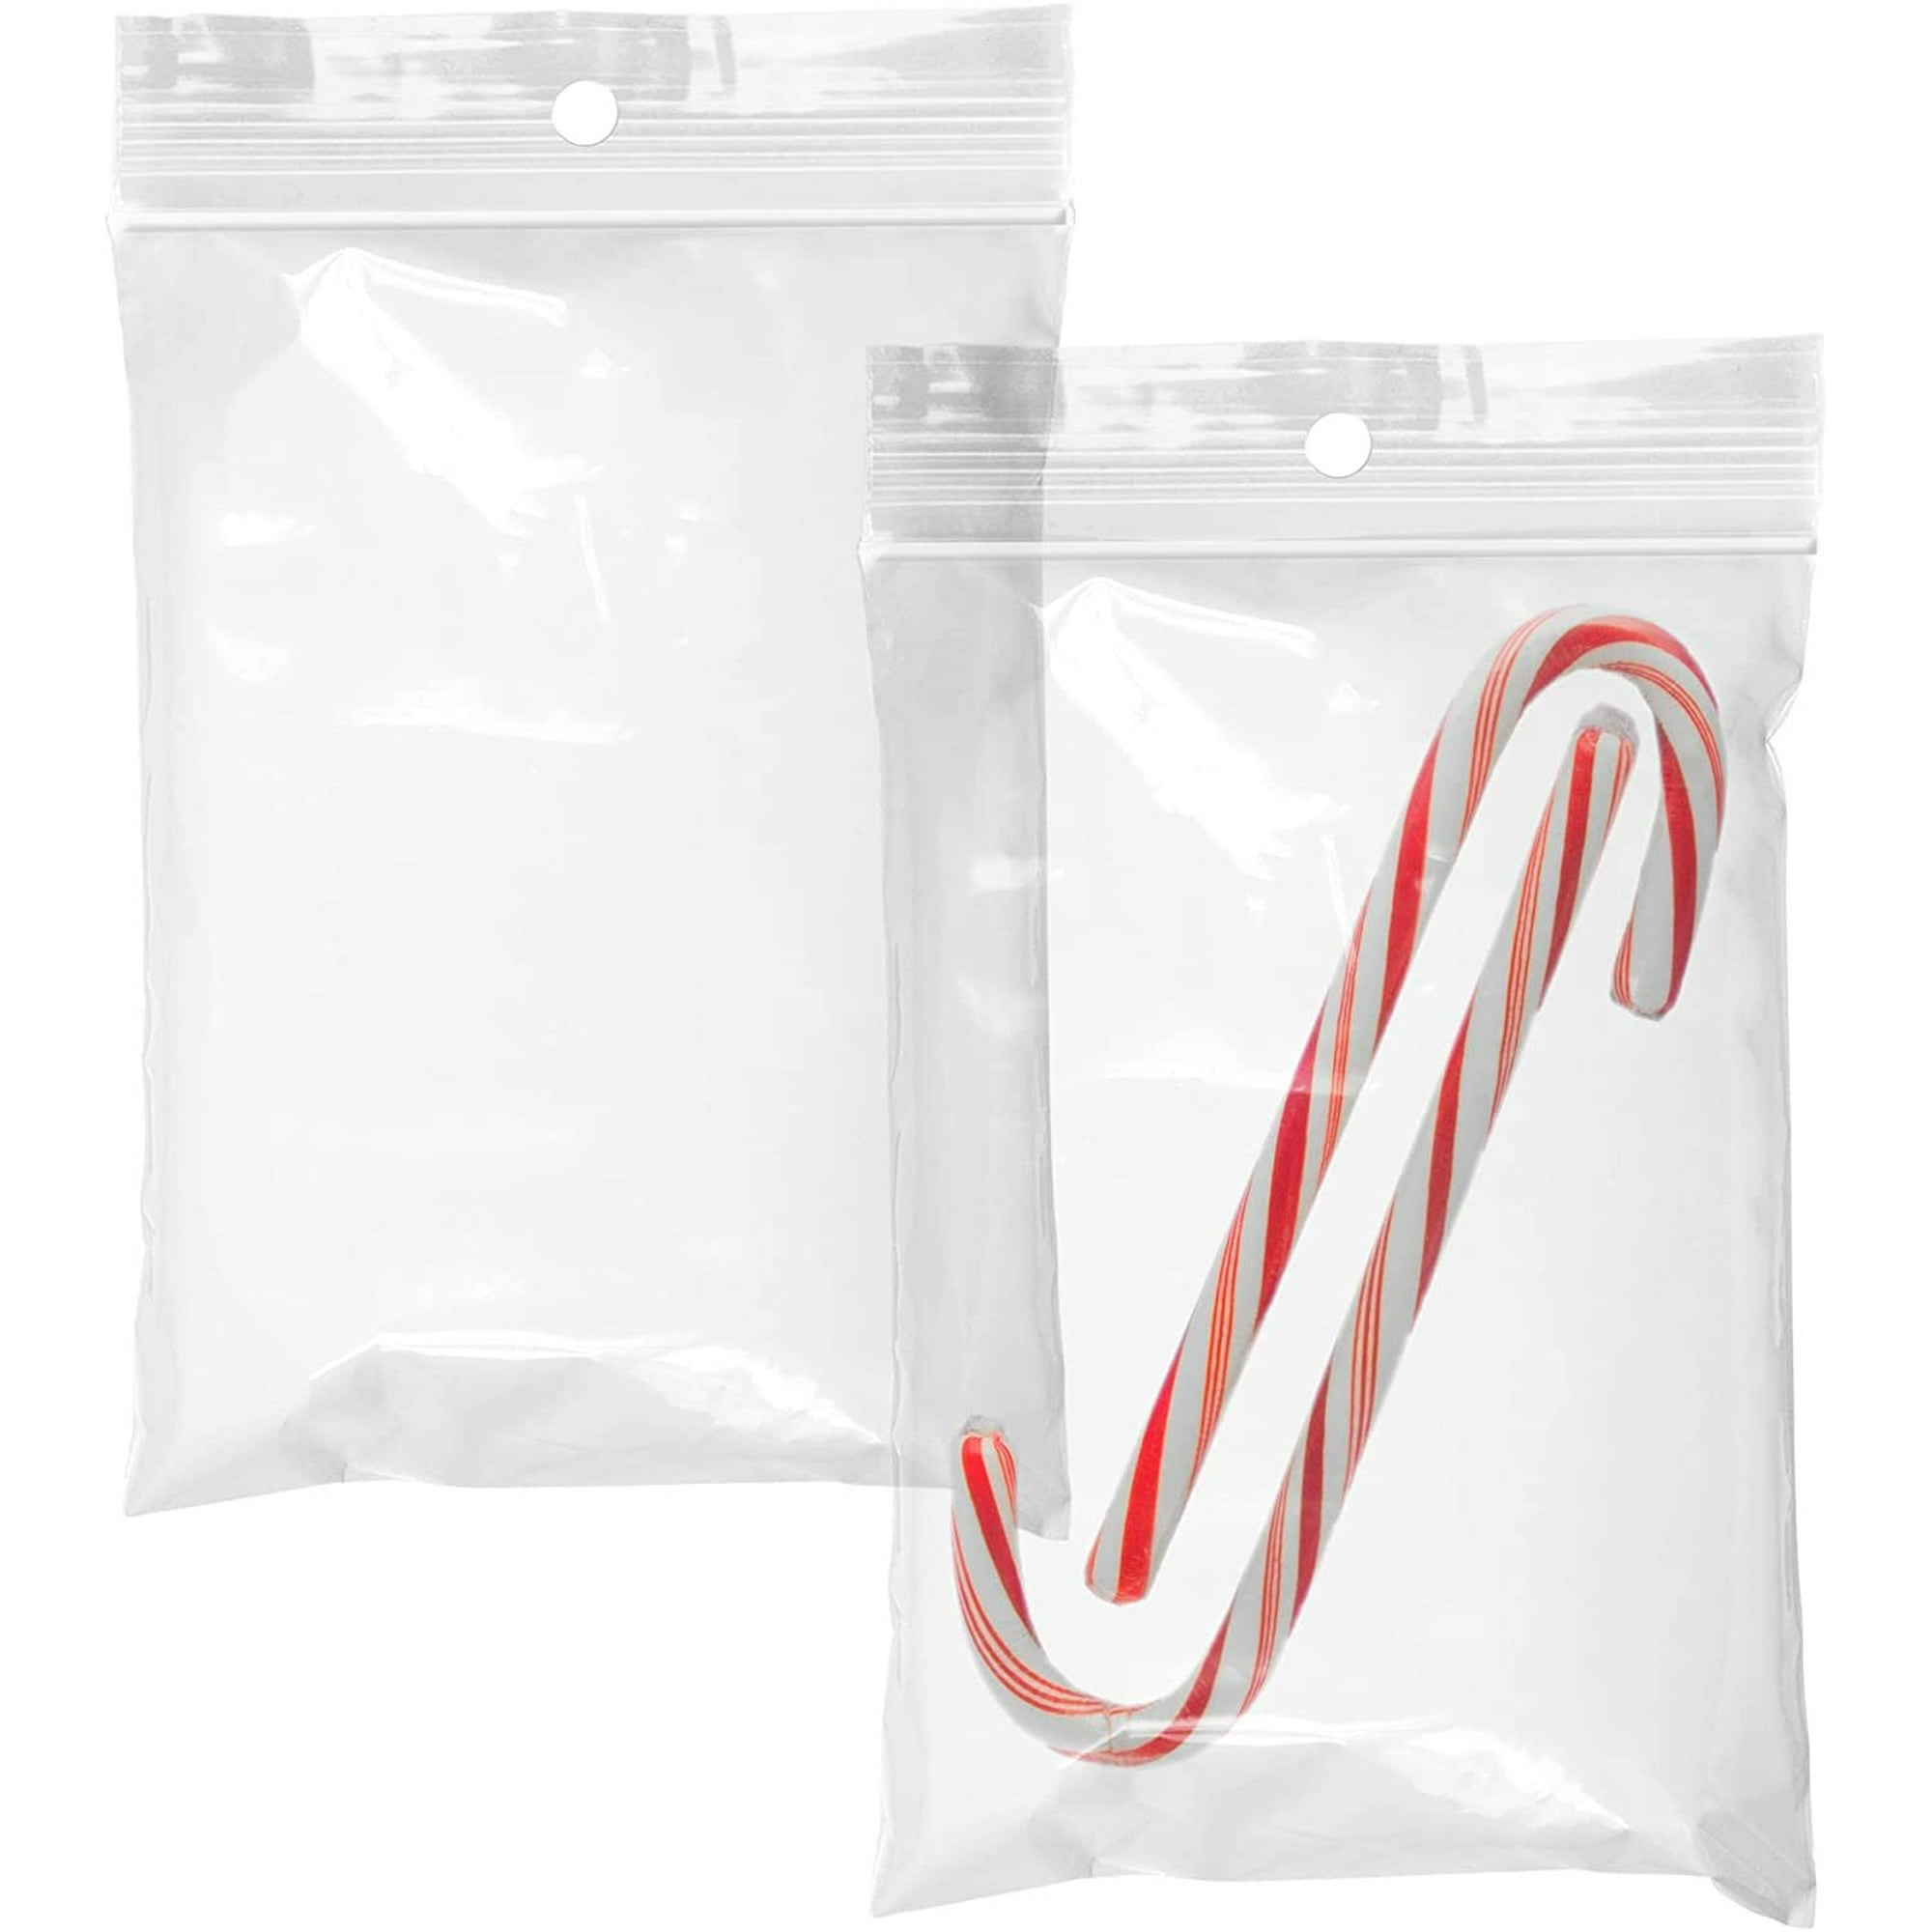 AMZ Supply Polyethylene Bags with Hang Hole, 5 x 7 Clear Plastic Bags 5x7,  Zip Locking Bags 2 Mil Polyethylene Pack of 100 